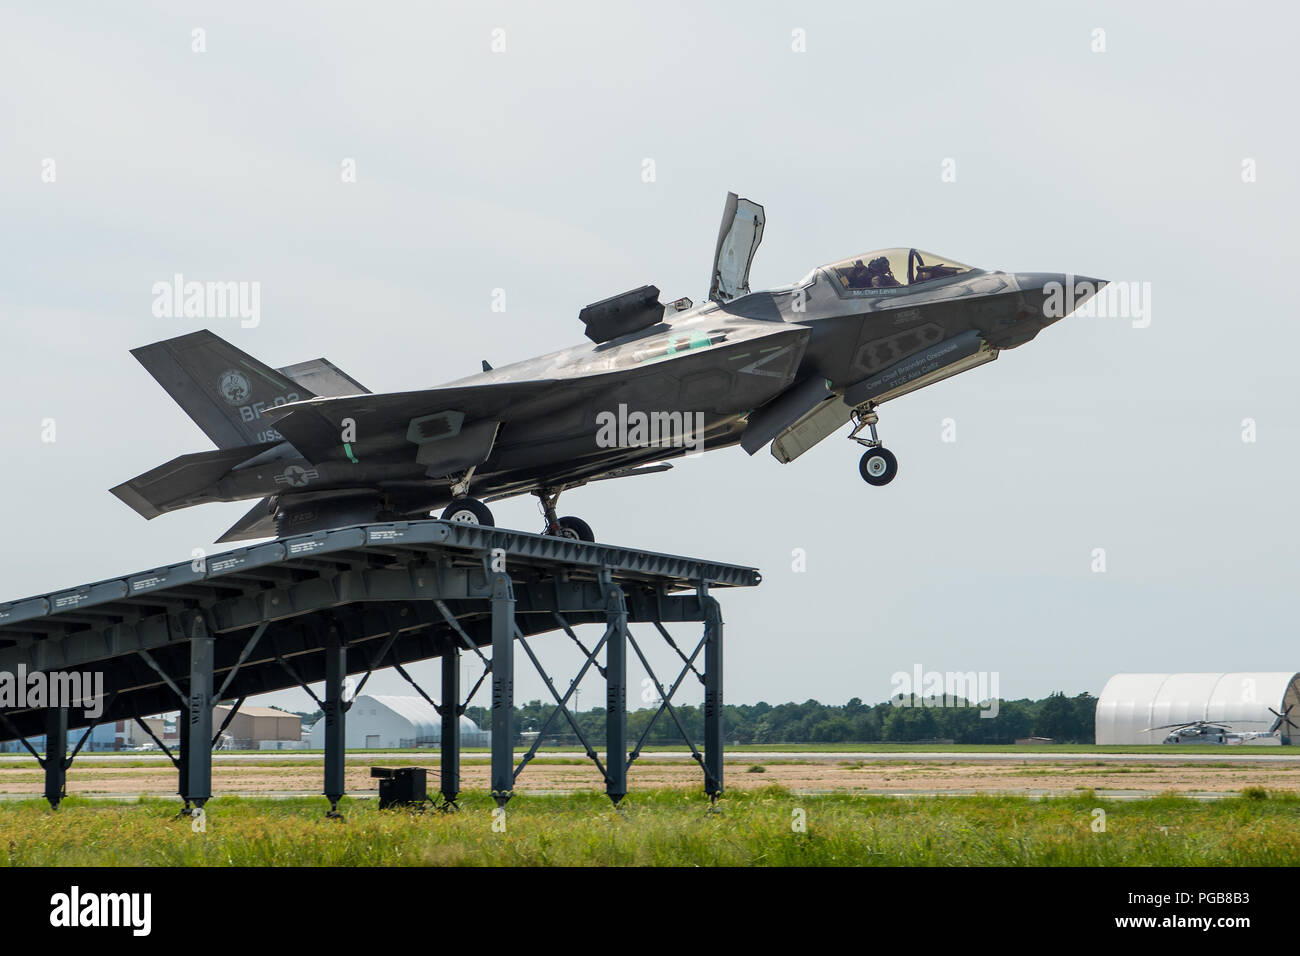 U.S. Marine Corps Maj. Michael Lippert, F-35 Pax River ITF test pilot, completes an asymmetric ski jump at Naval Air Station Patuxent River, Maryland, Aug. 16, 2018, as part of the Queen Elizabeth workups in preparation for the First of Class Flight Trials (Fixed Wing) aboard Britain’s newest aircraft carrier, HMS Queen Elizabeth.   Lippert, along with ITF pilots Royal Navy Cdr. Nathan Gray, Royal Air Force Sqn. Ldr. Andy Edgell and BAE Systems Peter Wilson, and nearly 200 ITF experts will embark with two F-35B test jets, and several sensors and data recorders to evaluate the fifth-generation  Stock Photo